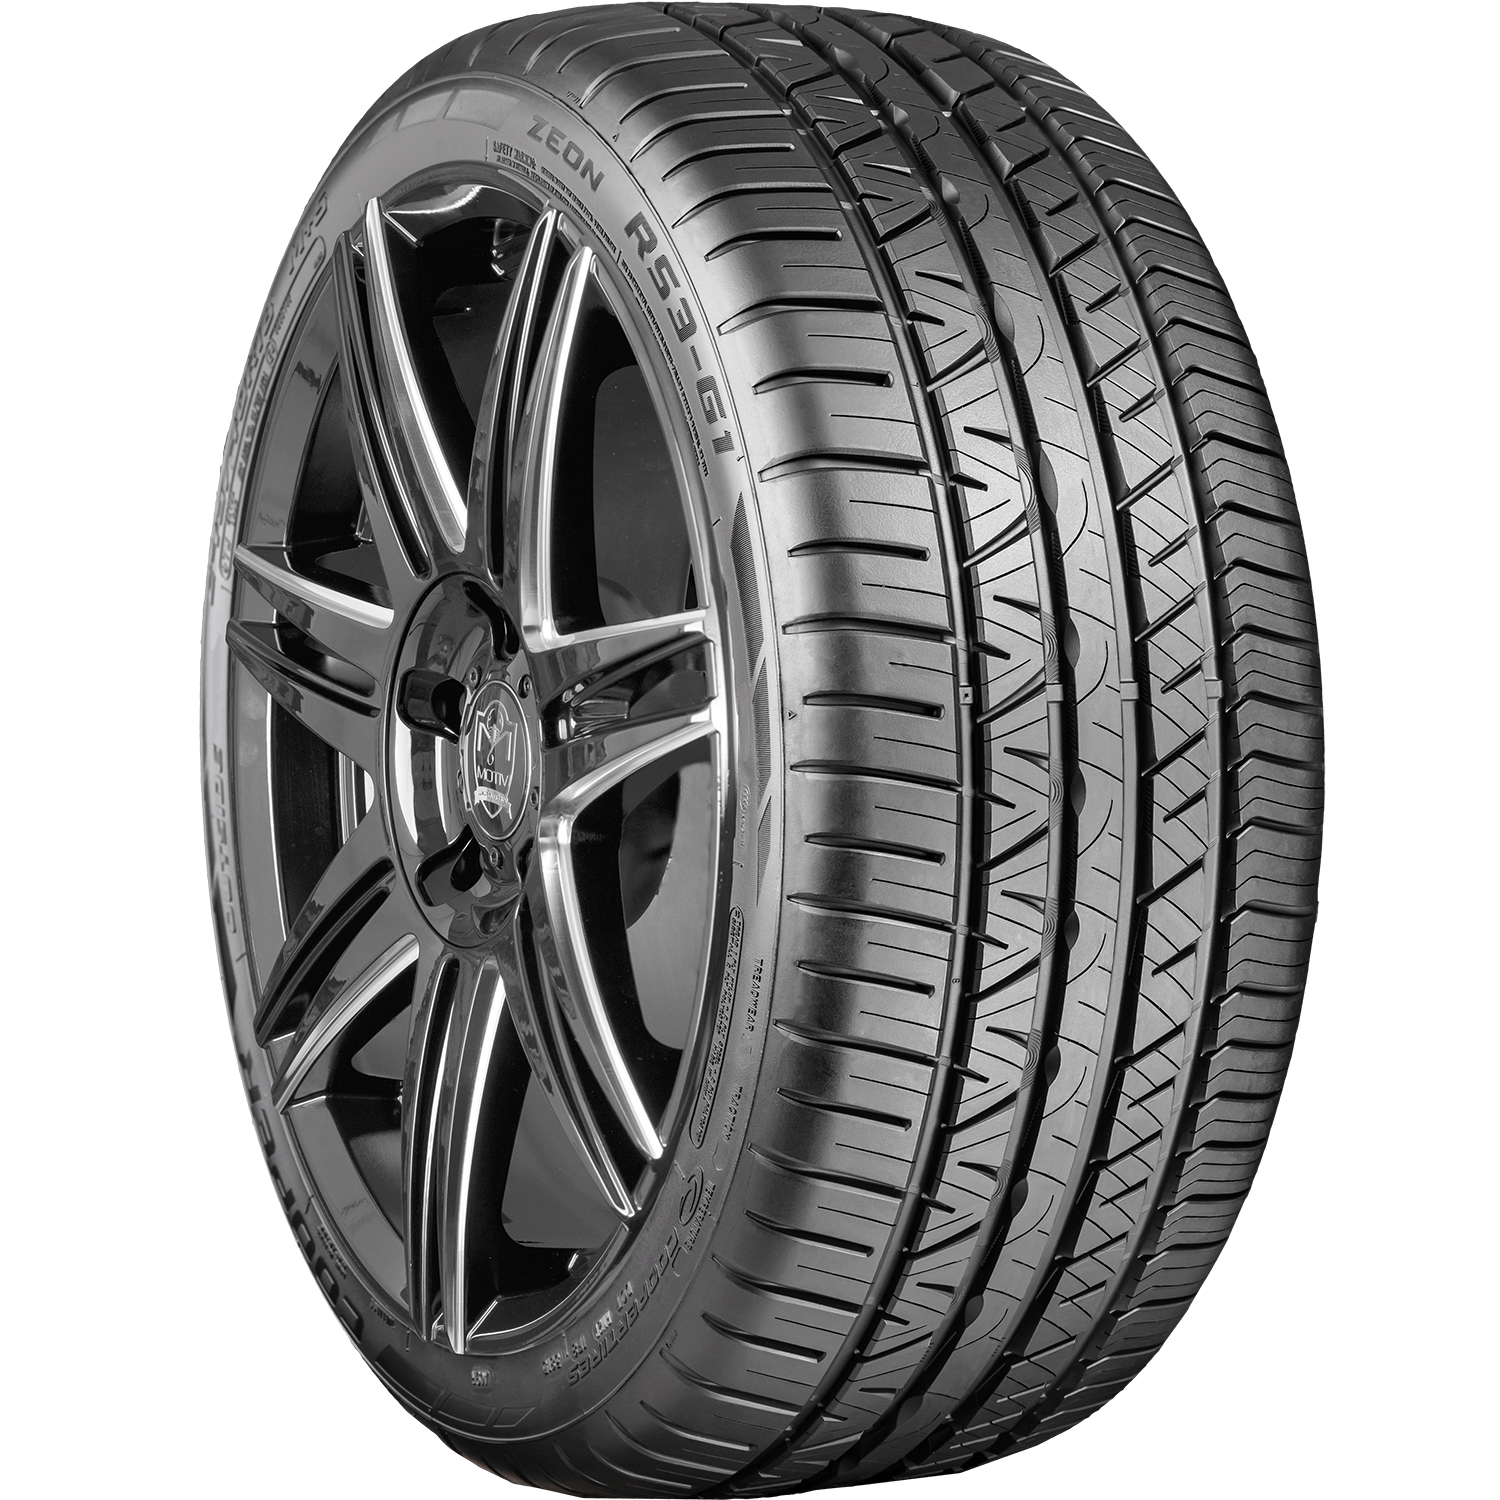 Cooper Tire Cooper Zeon RS3-G1 255/40R19 100W XL A/S High Performance